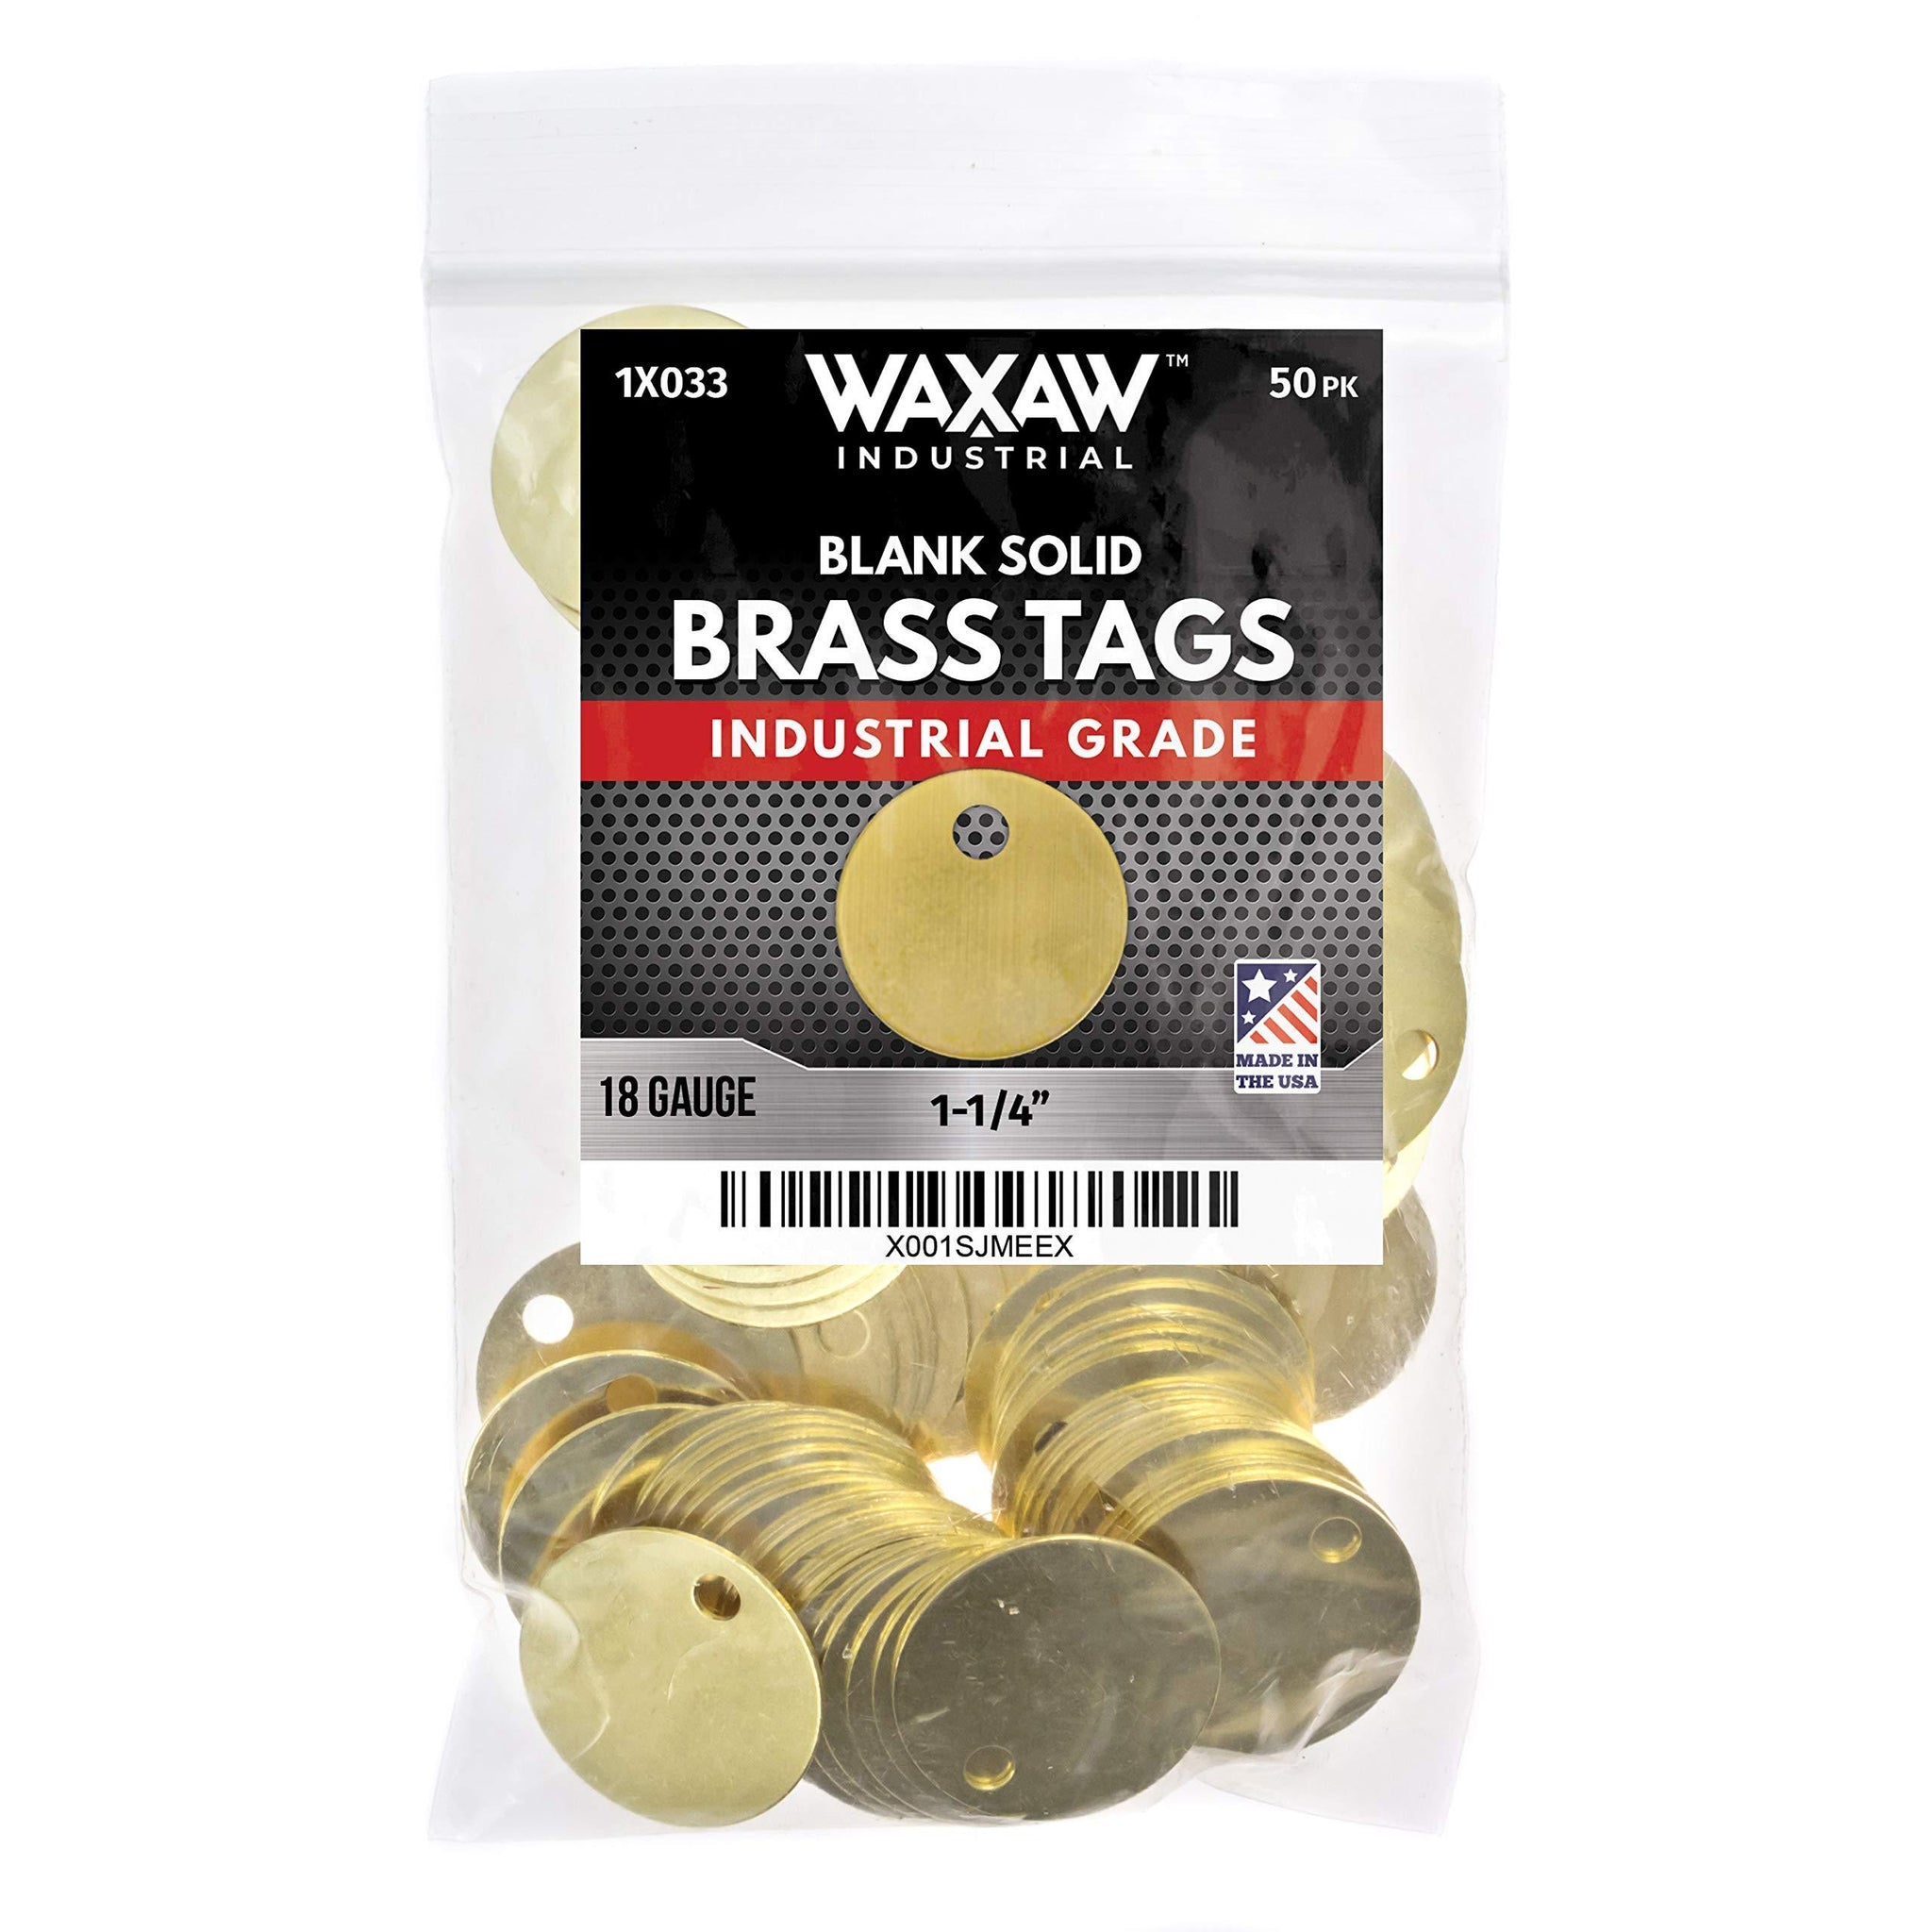 1.25u00e2u20acu009d Solid Brass Stamping Tags Industrial Grade (0.040") Blank Chits for Pipe Valves, Tool Check-Out and Equipment Labeling | Made in USA (50 Pack)